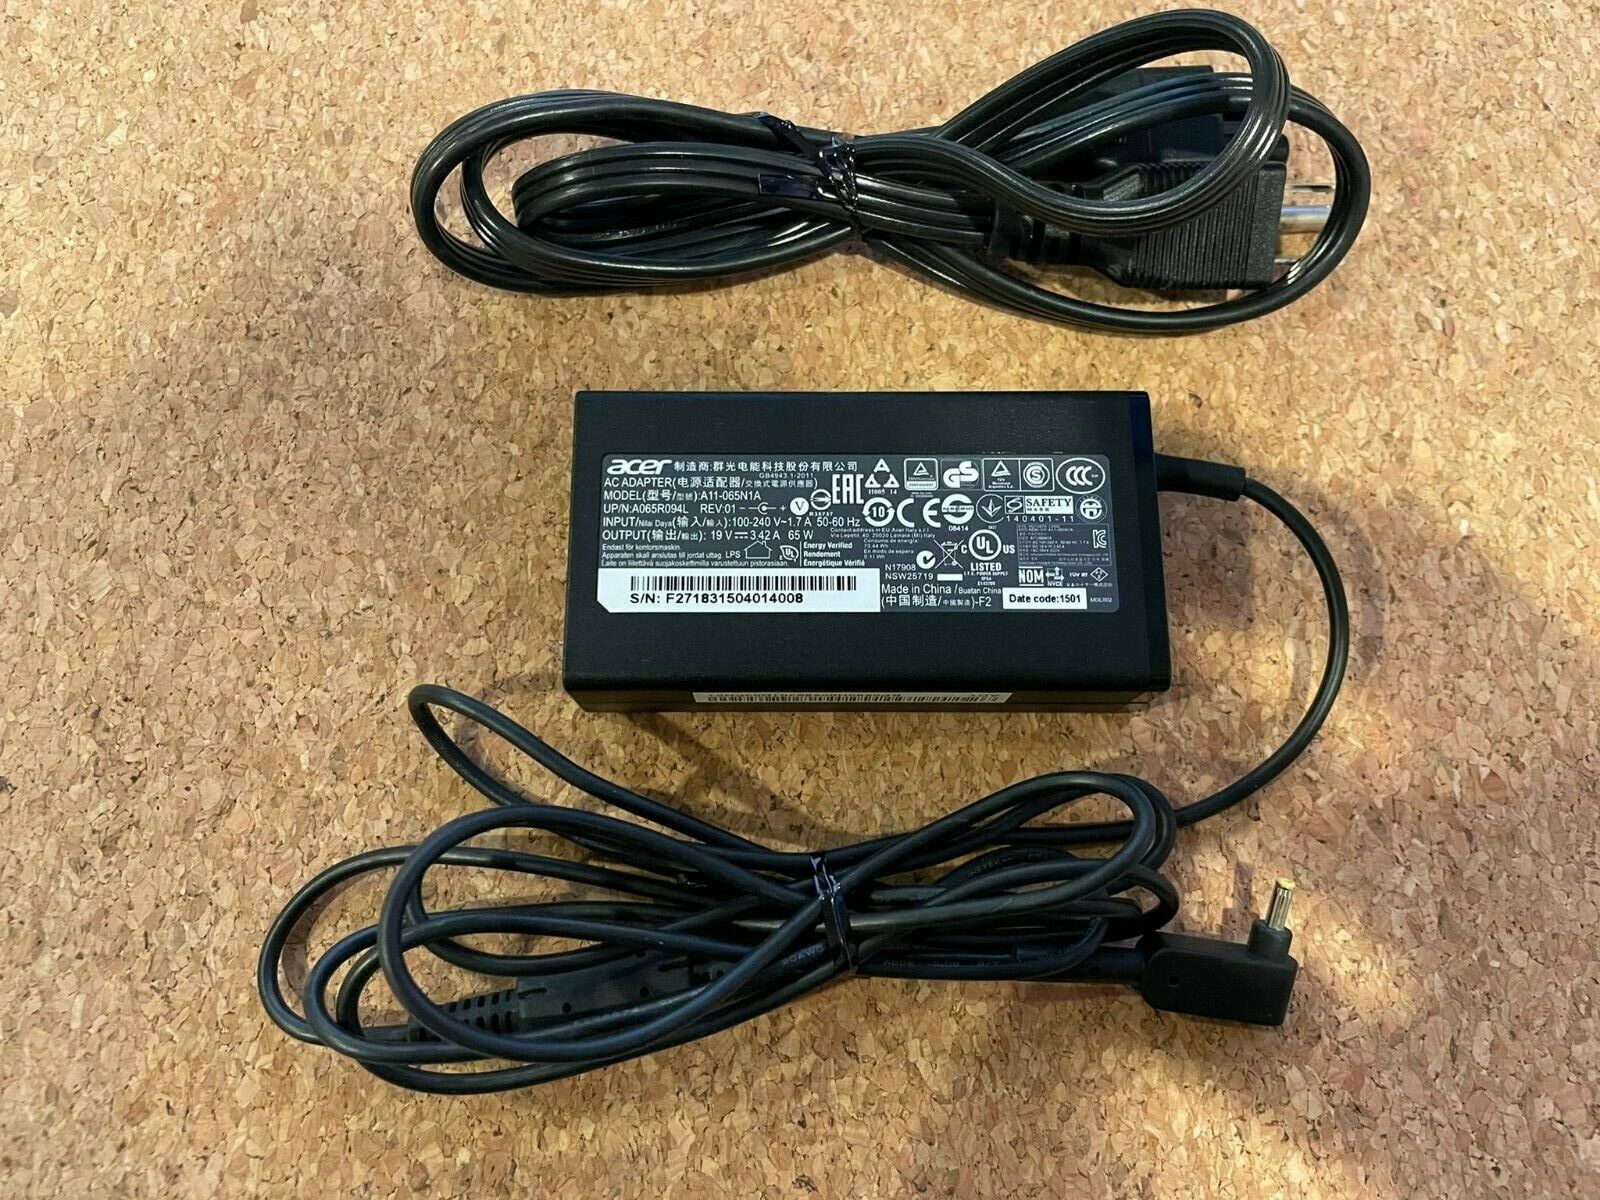 Acer Original OEM ac Adapter Charger for Acer Chromebook C731 and C740. 